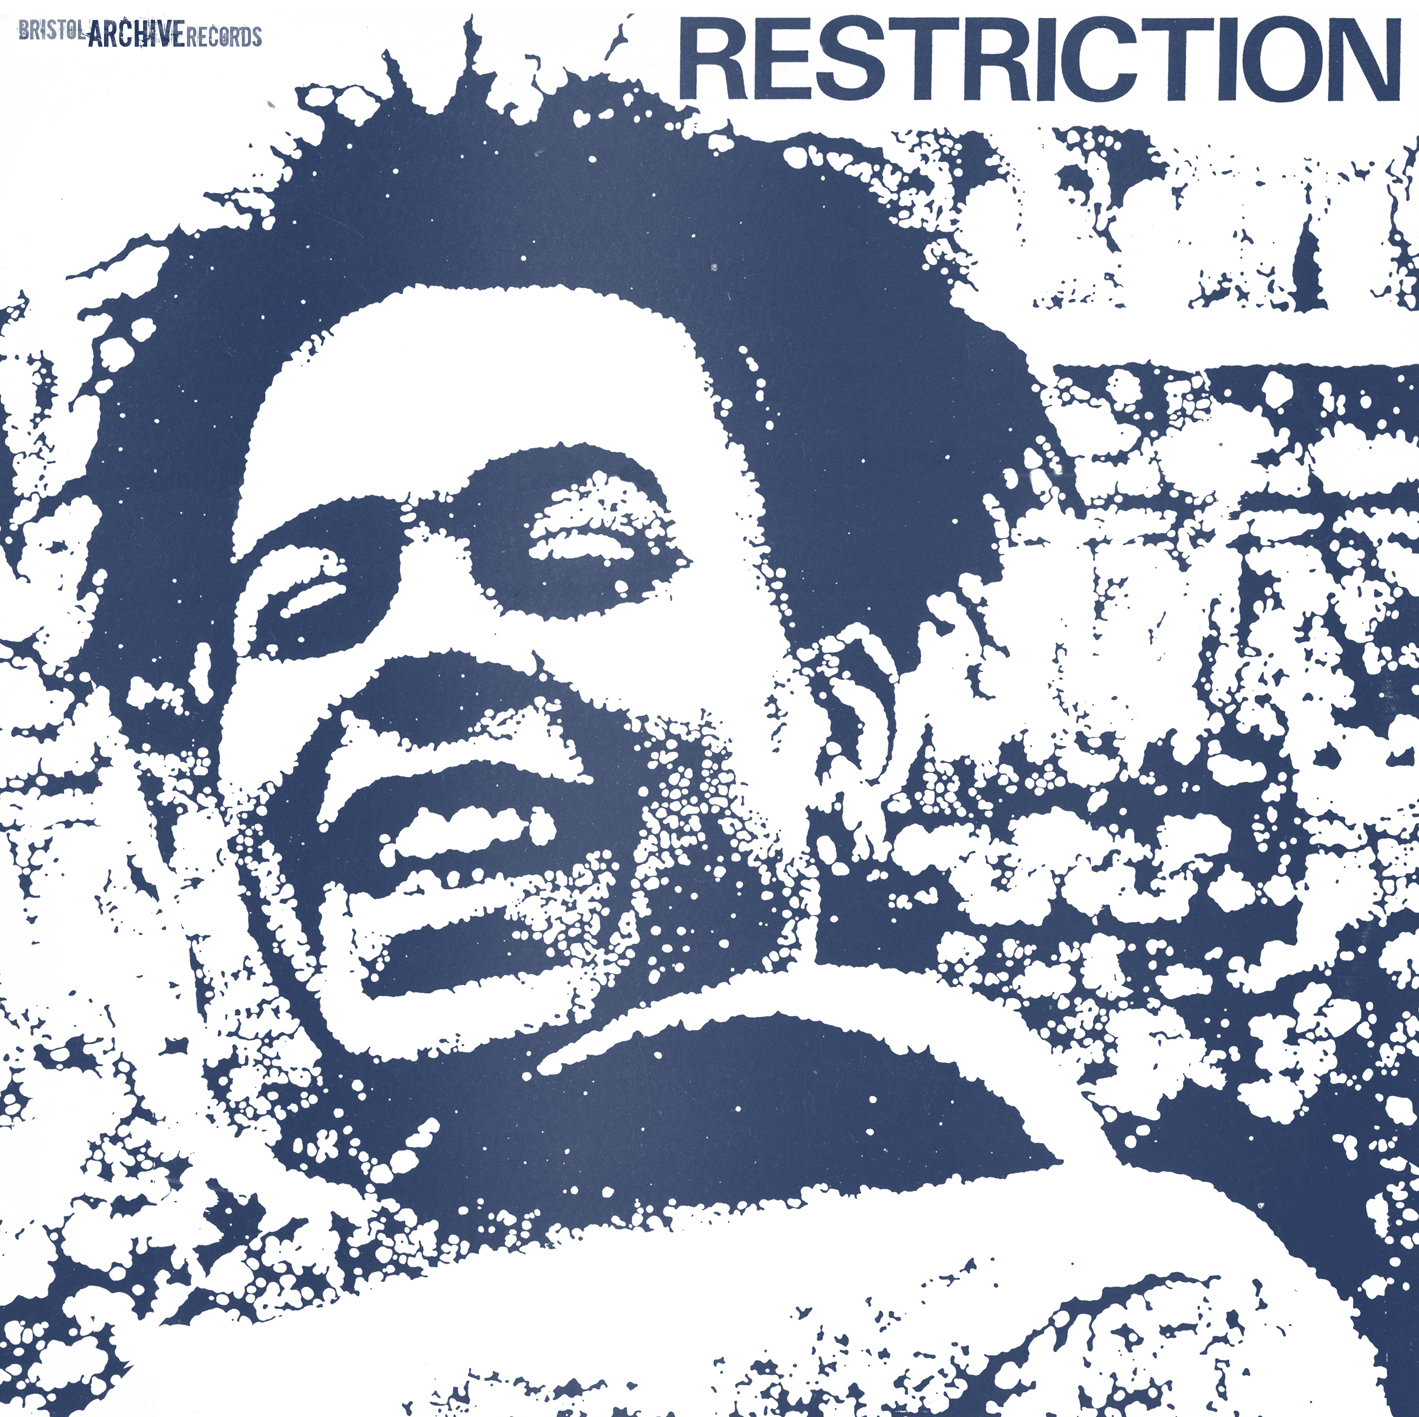 Restriction(Rob Smith)/ACTION 12"